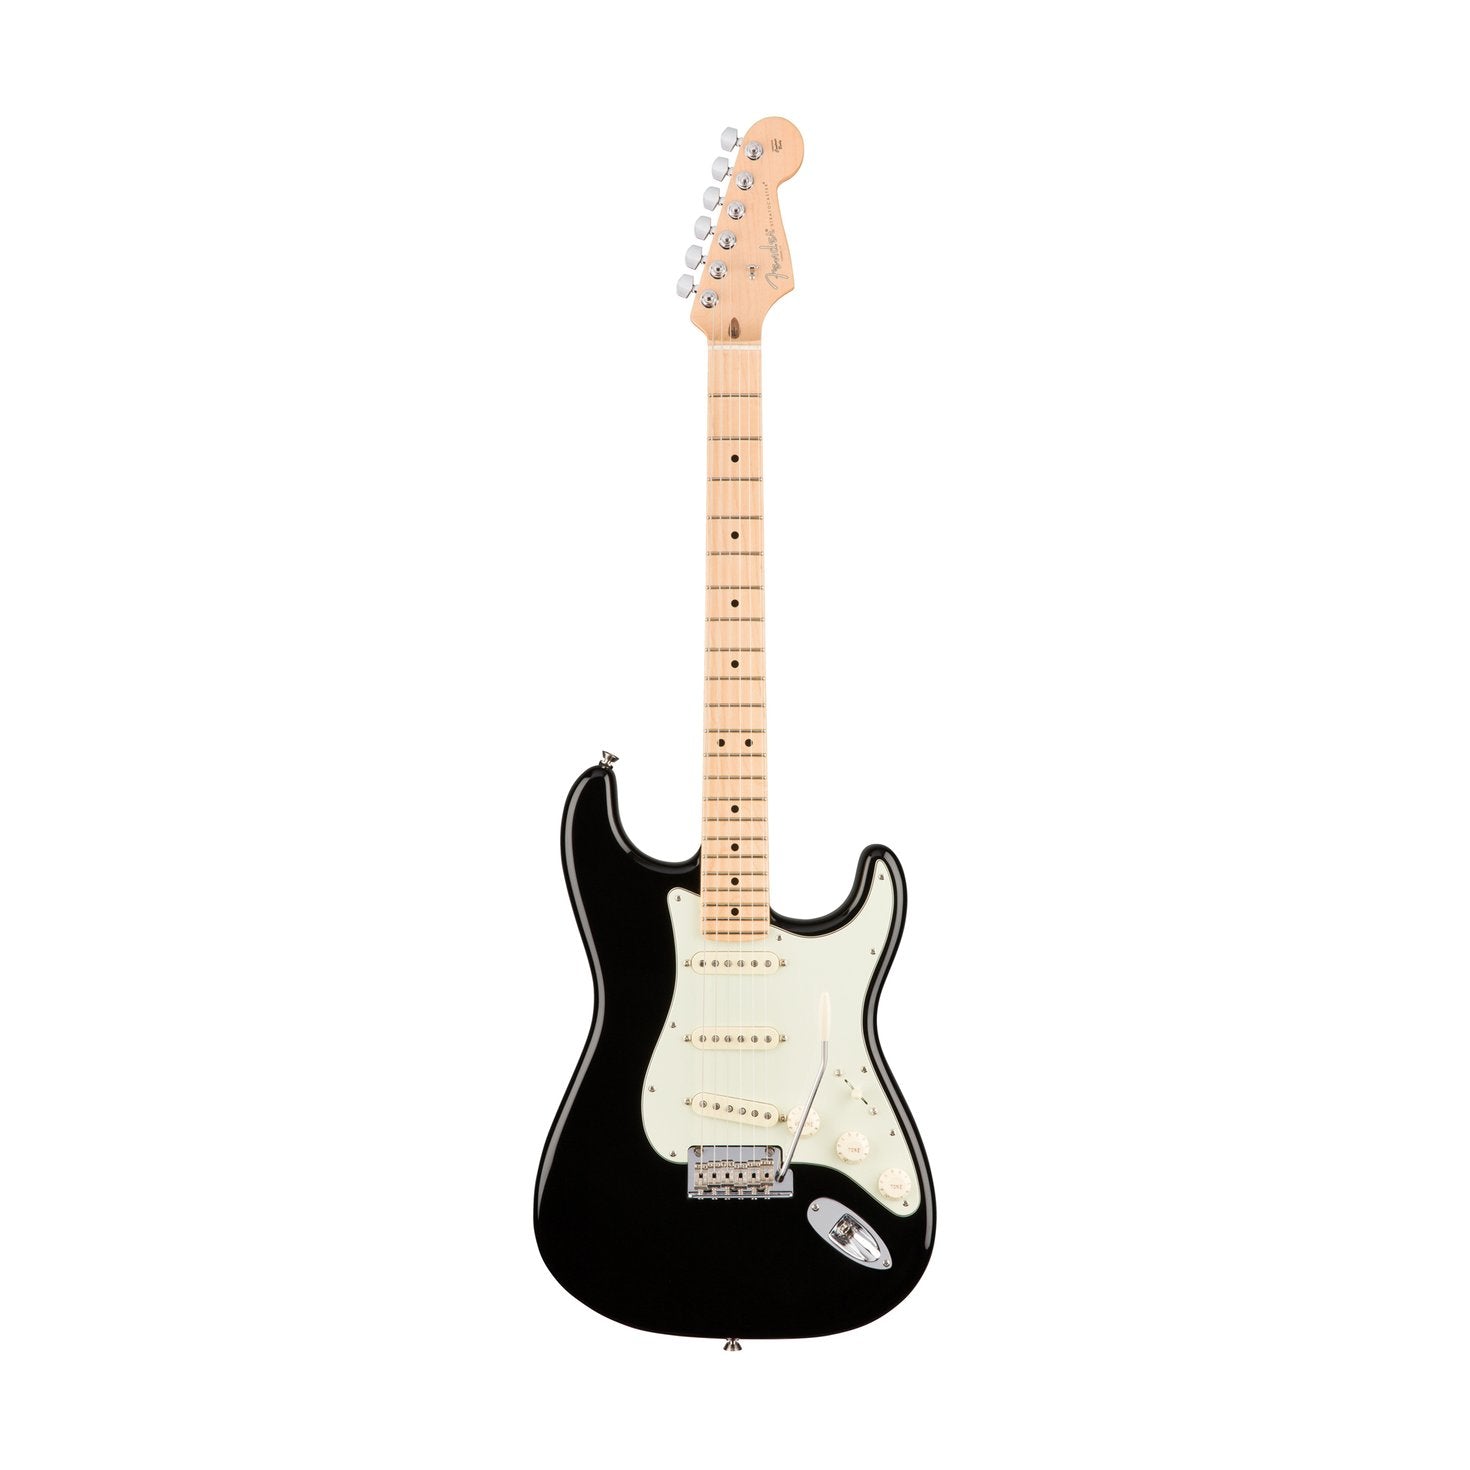 Fender American Professional Stratocaster Electric Guitar, Maple FB, Black, FENDER, ELECTRIC GUITAR, fender-electric-guitar-f03-011-3012-706, ZOSO MUSIC SDN BHD